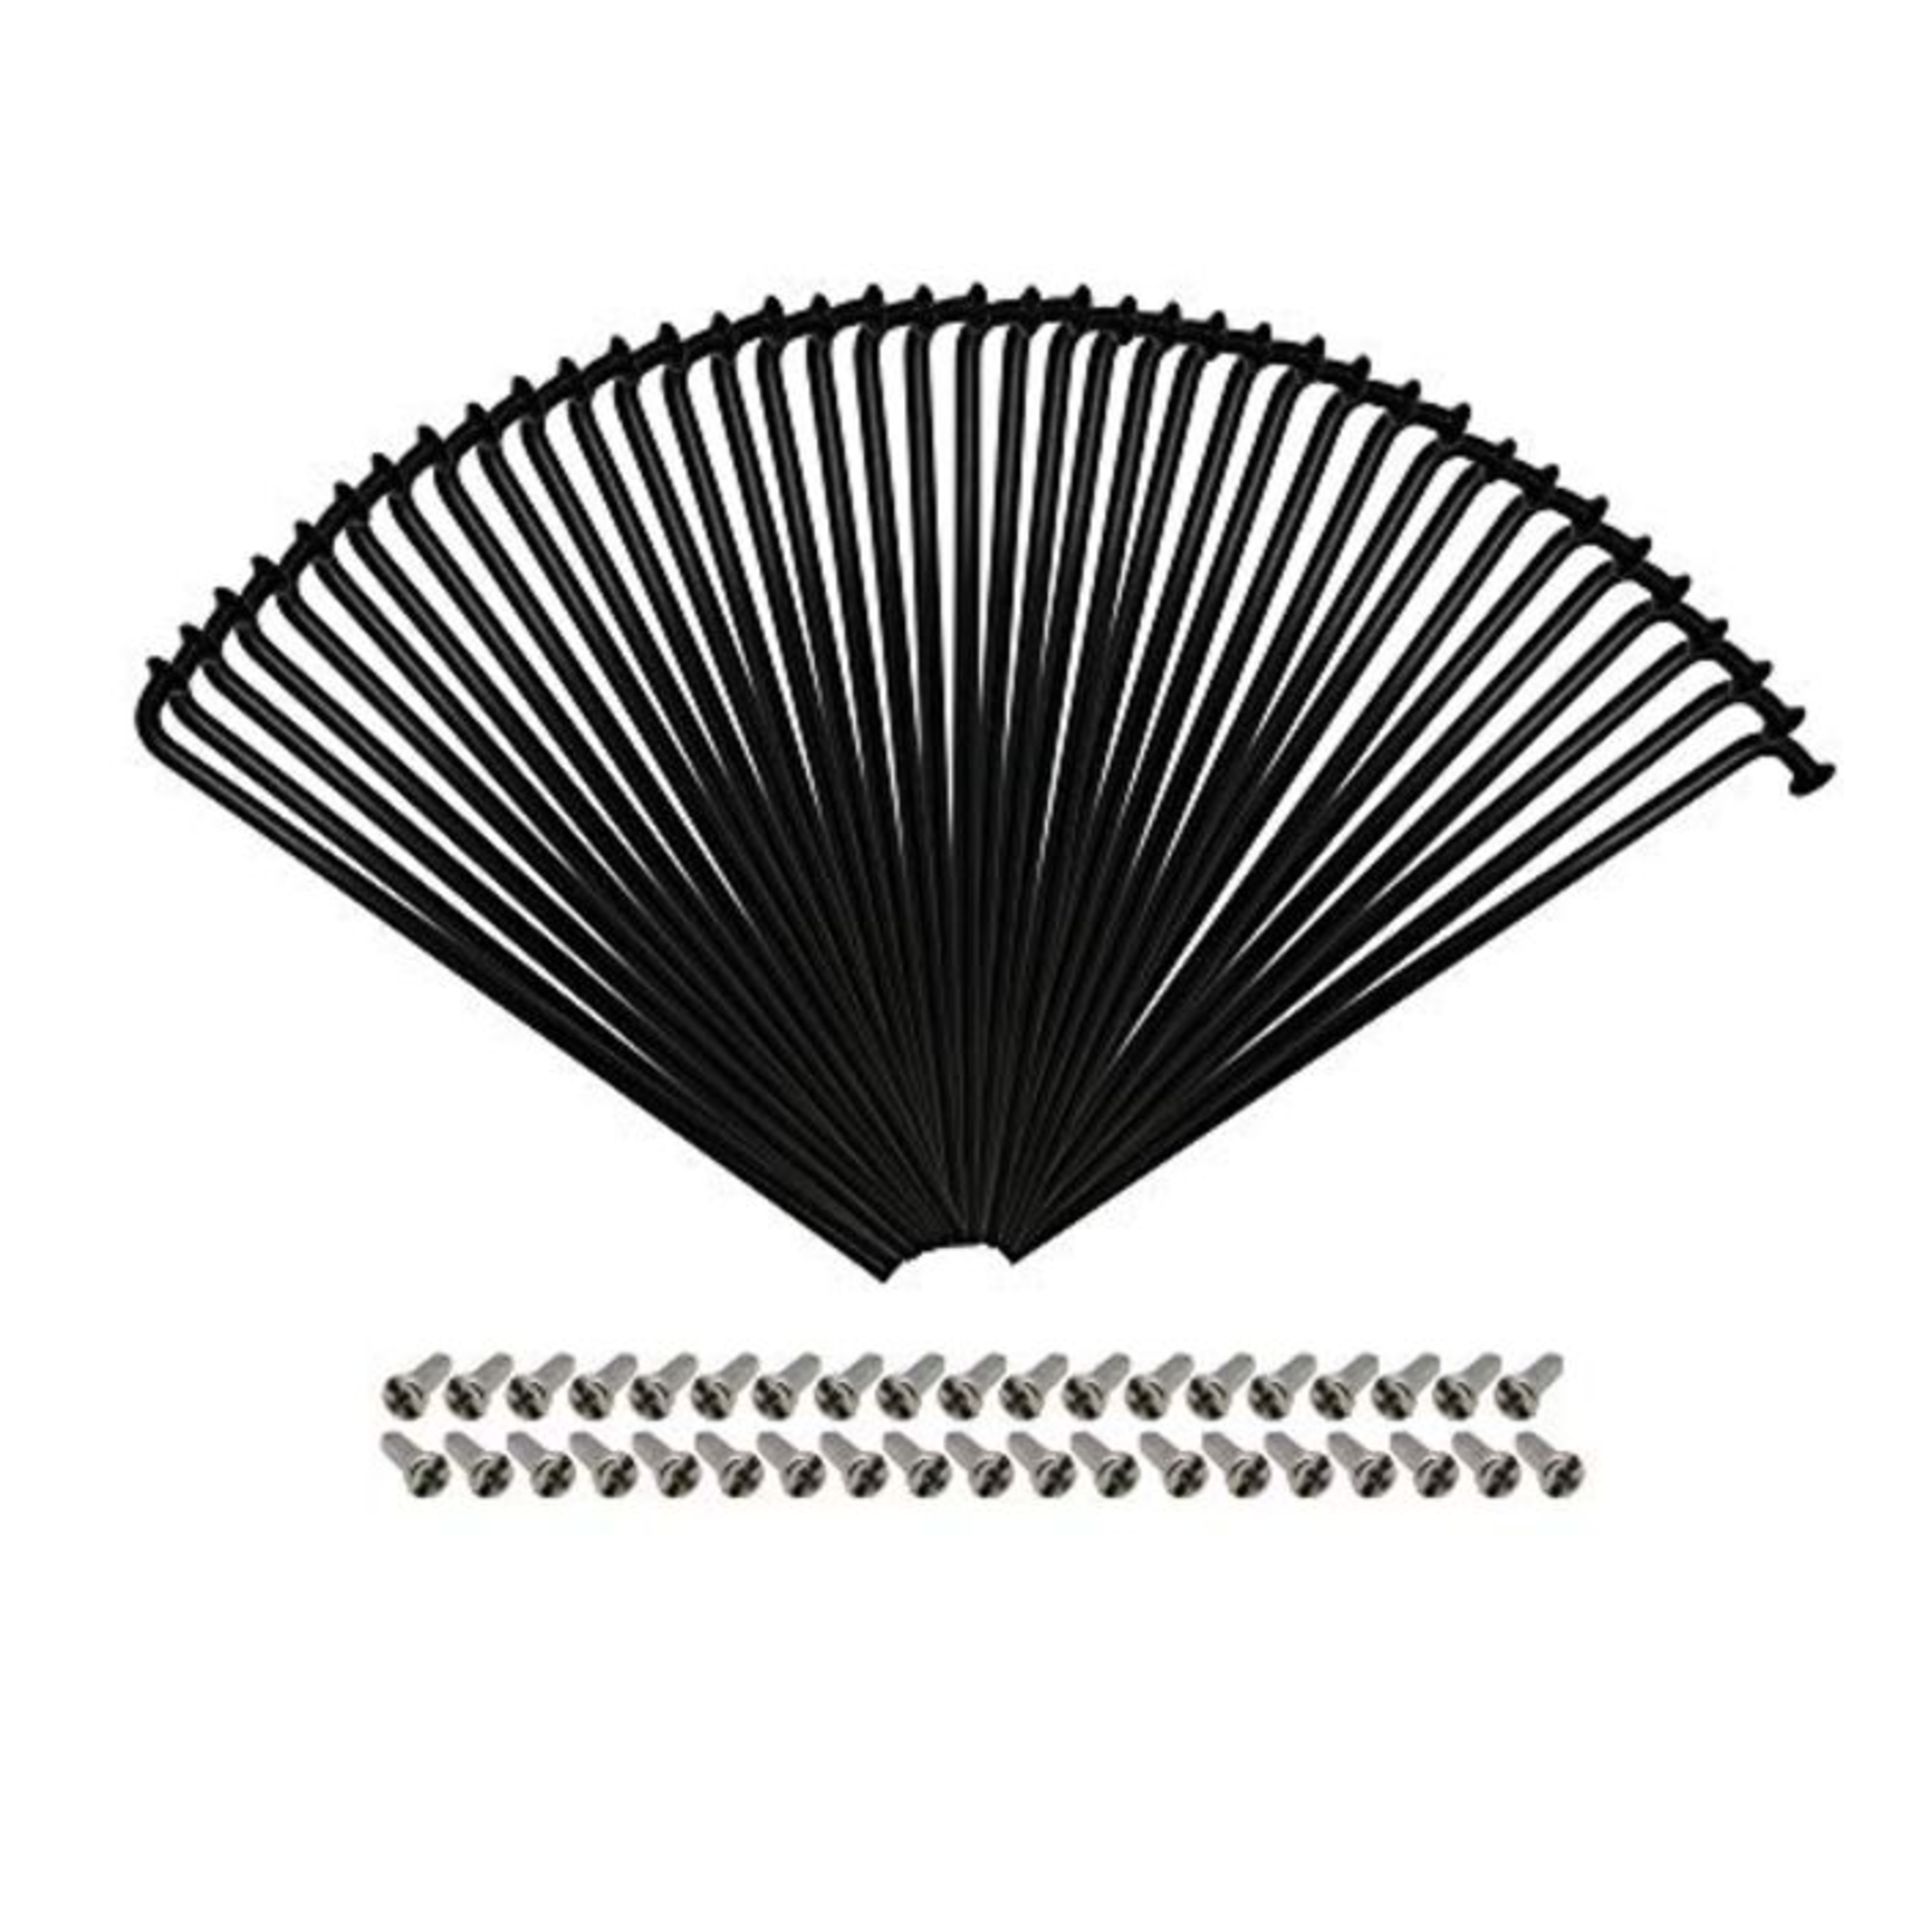 P4B | 38x spokes with 38x nipples - 294 mm | Diameter 2 mm | Bicycle spokes made of st